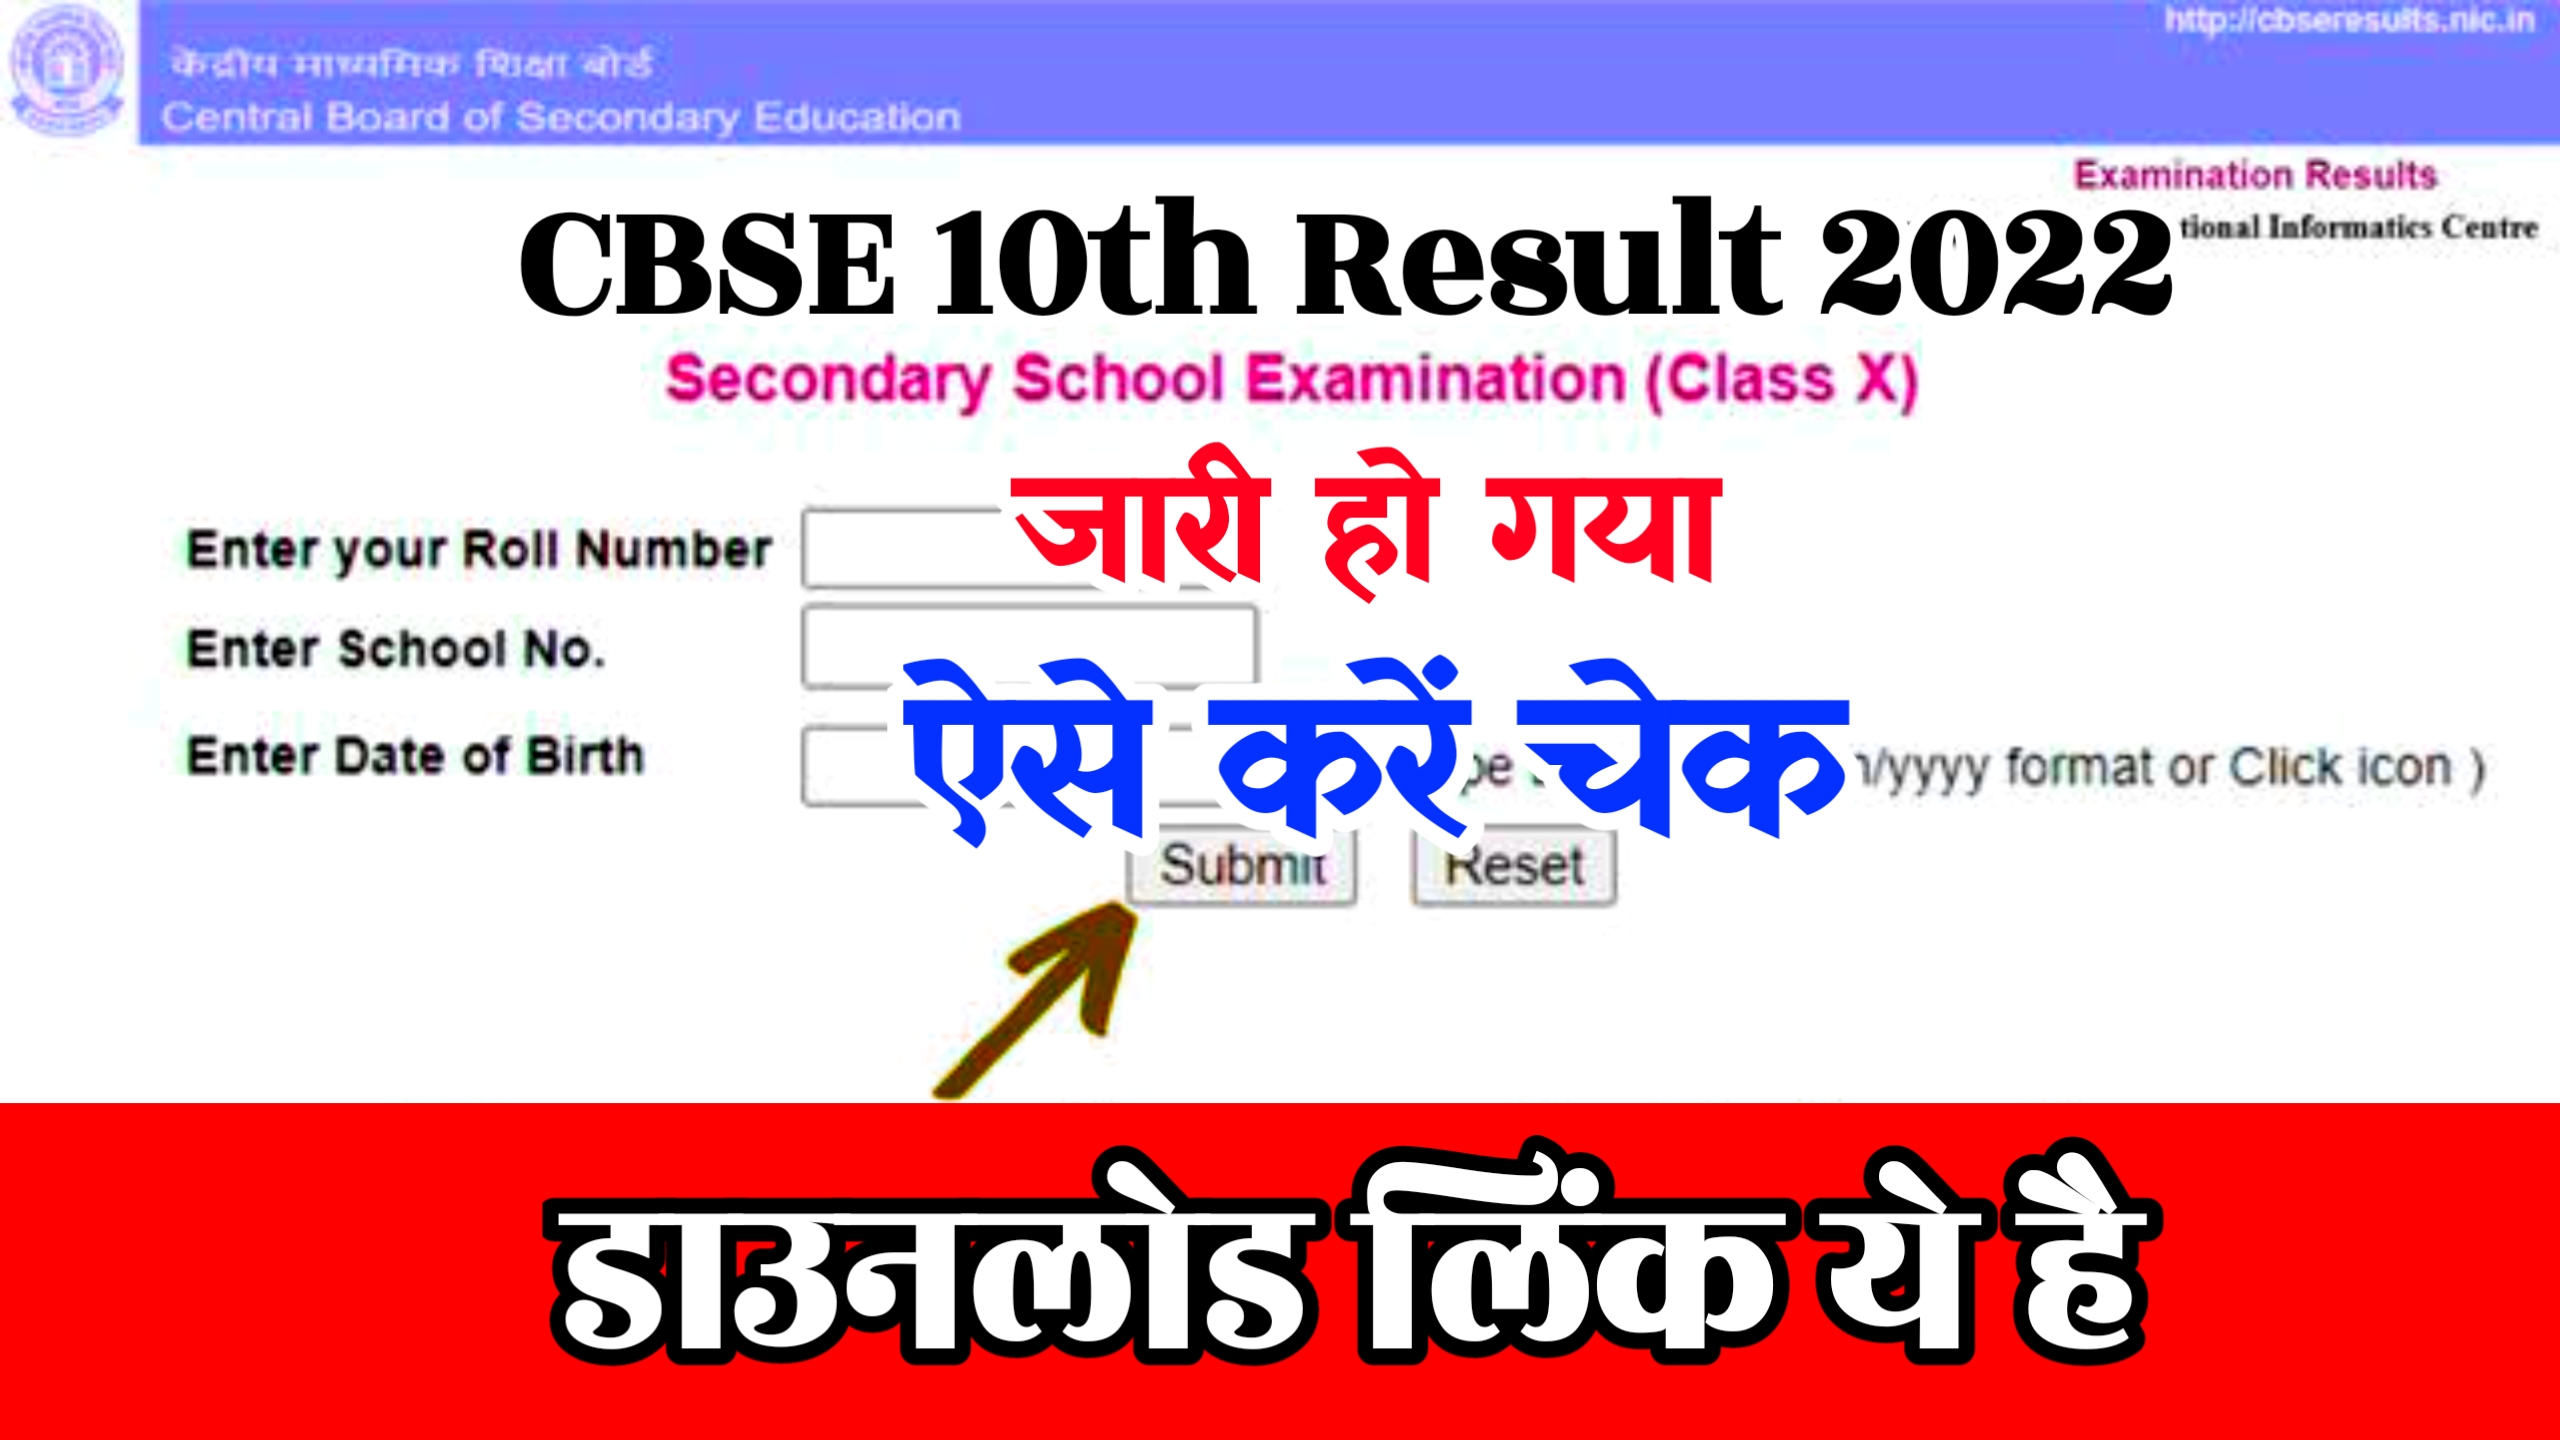 CBSE 10th Result 2022 Declared Now : Matric Marks 2022 @results.cbse.nic.in